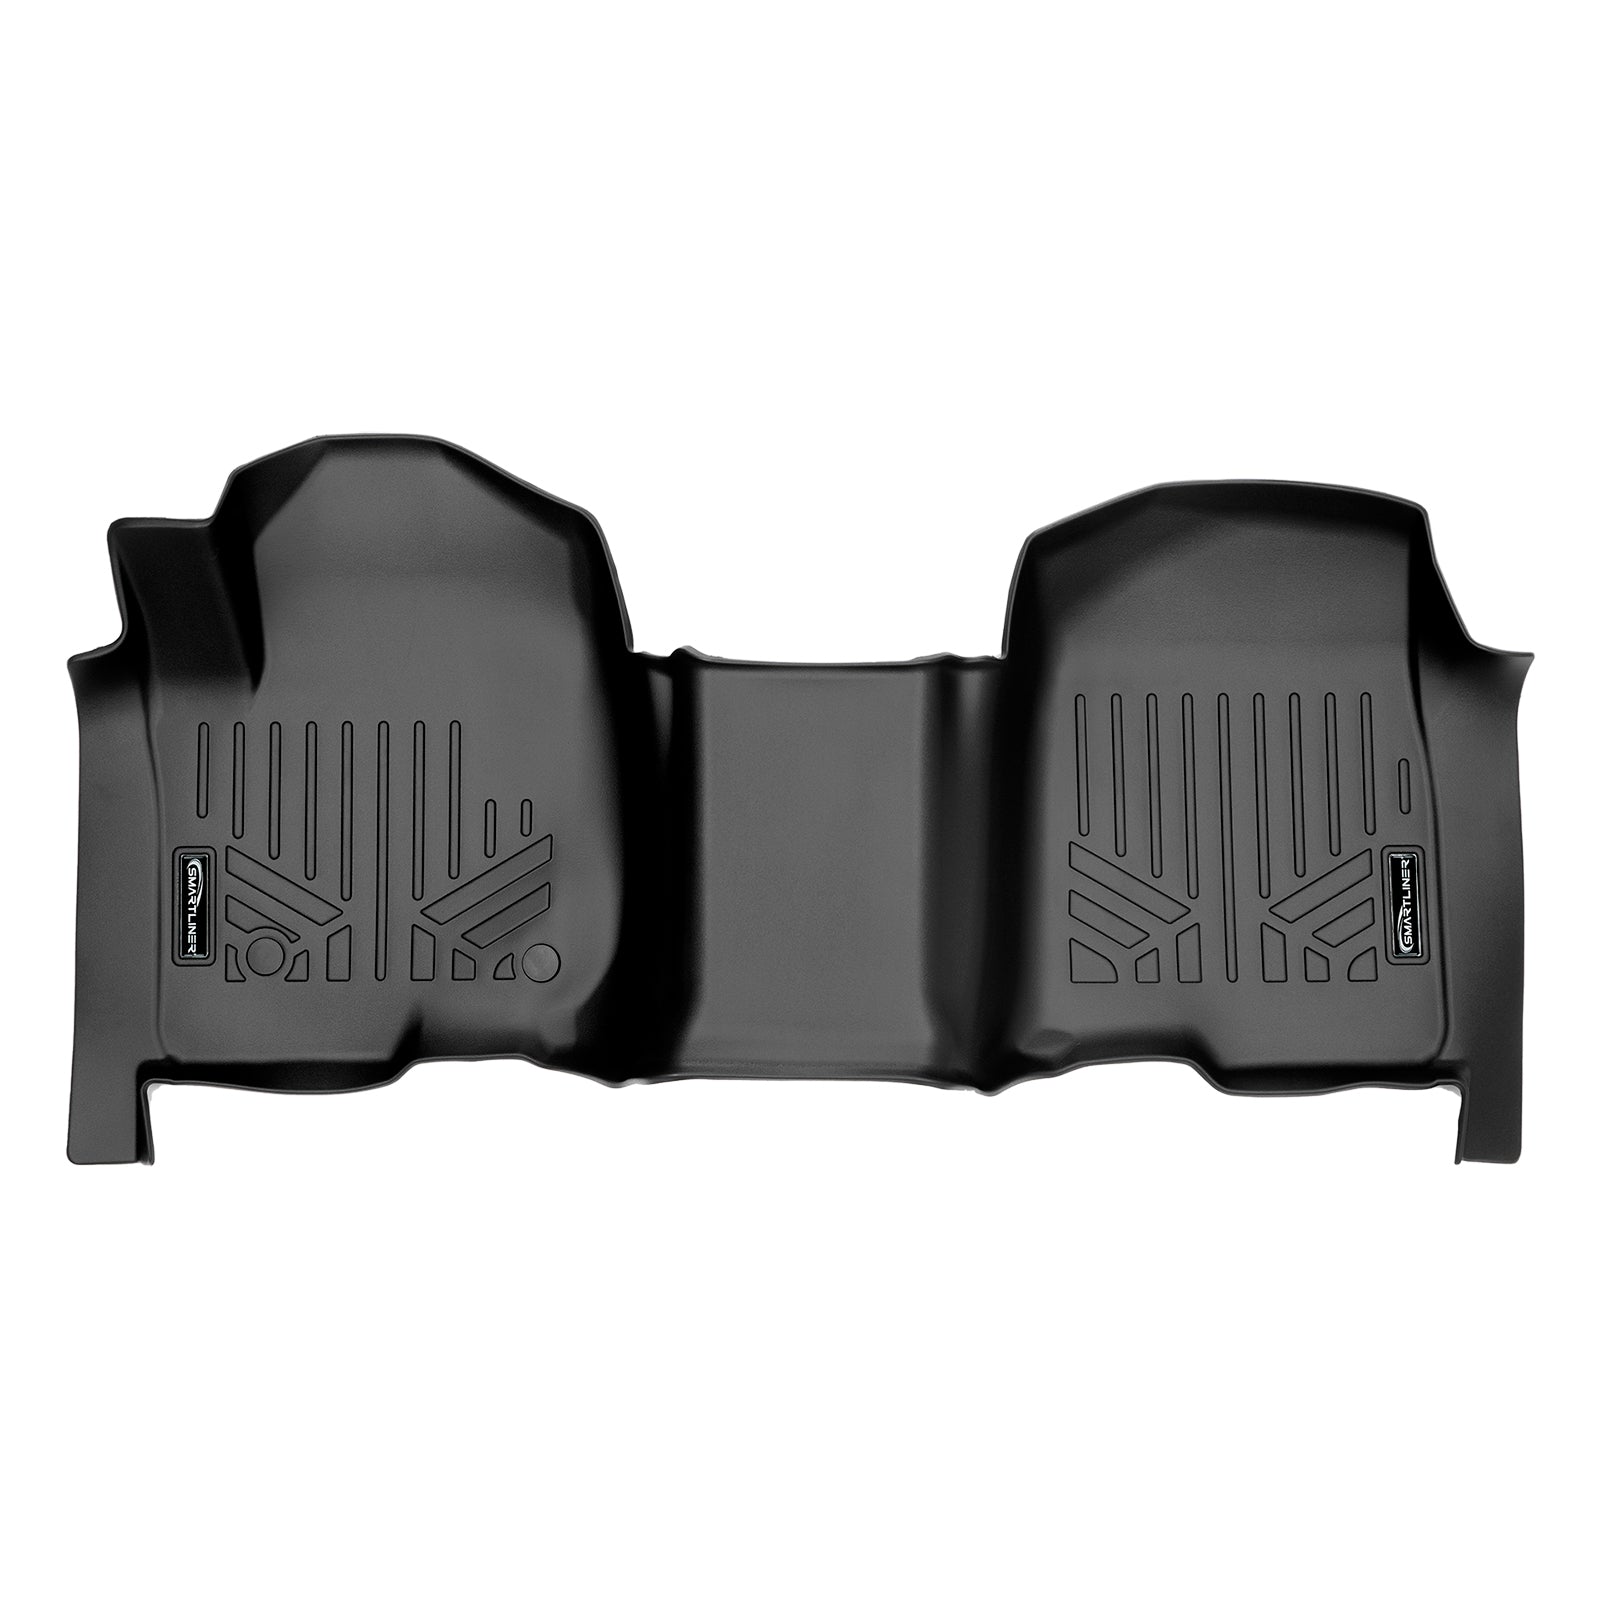 SMARTLINER Custom Fit Floor Liners For 2019-2023 Chevrolet Silverado 1500 Crew Cab With 1st Row Bench Seat (with OTH Coverage) and Carpet Flooring without the 2nd Row Underseat Storage